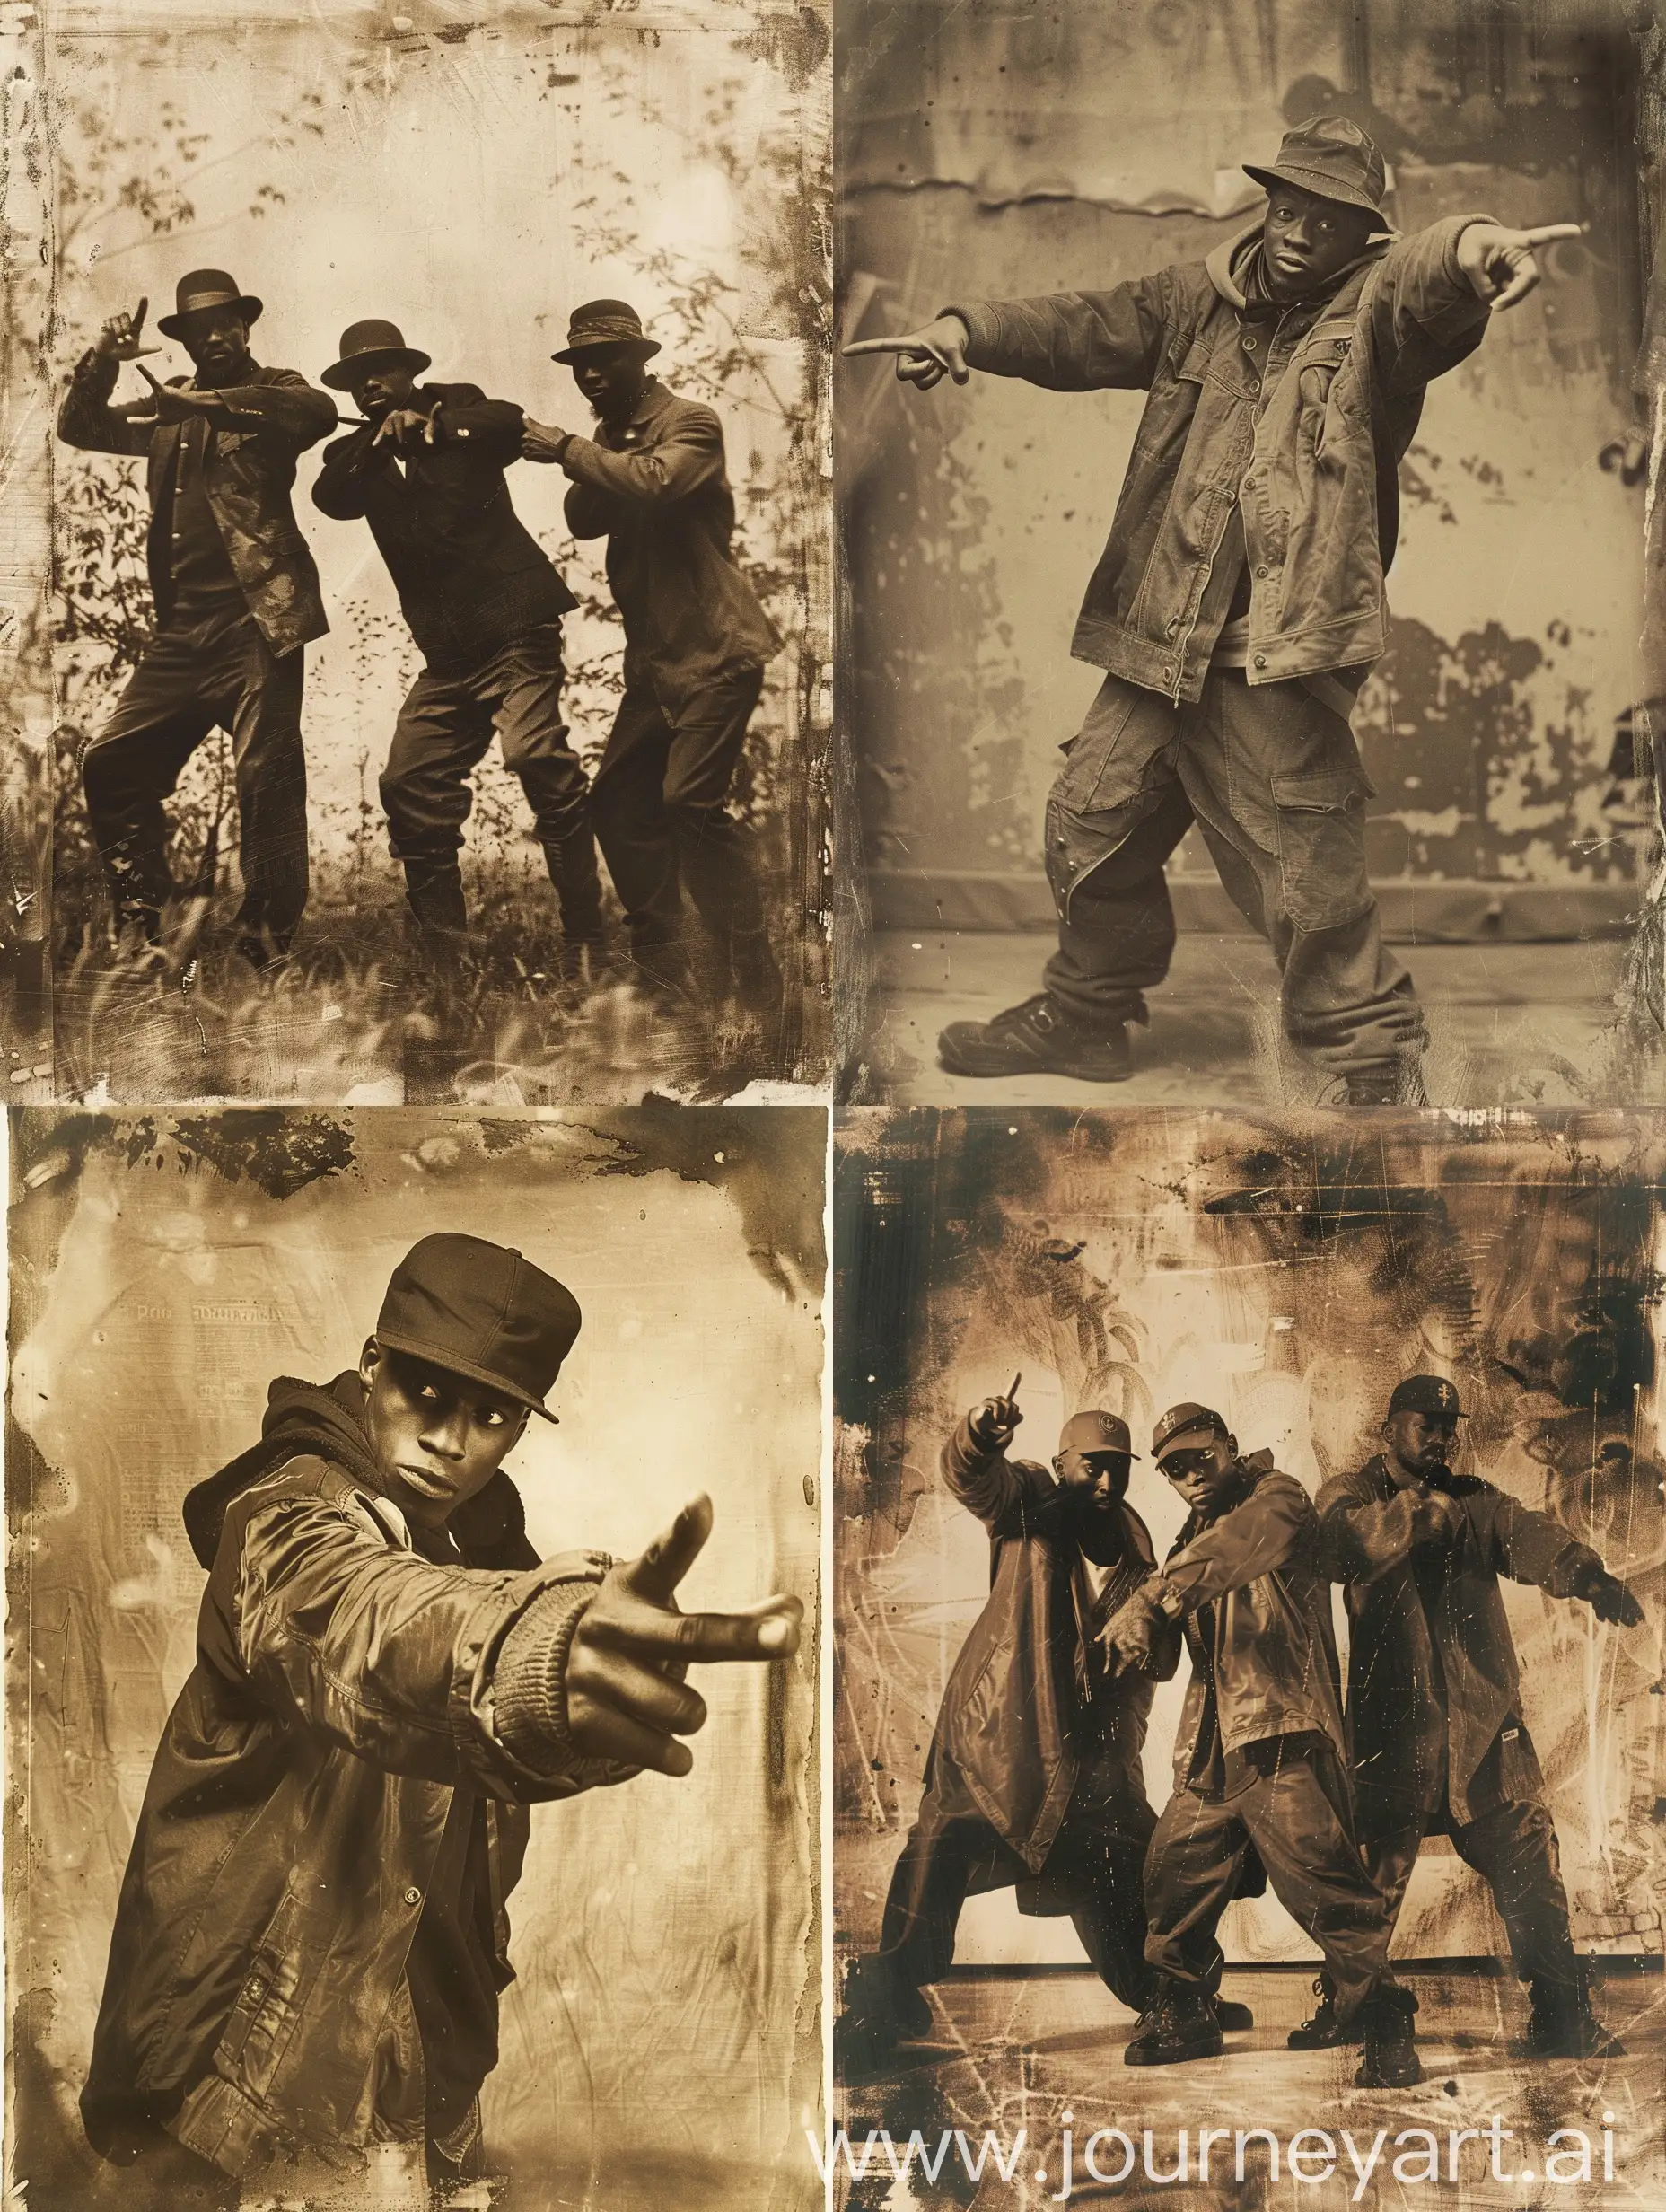 Pushkin shows the gestures of rappers, sepia, the effect of an aged photograph